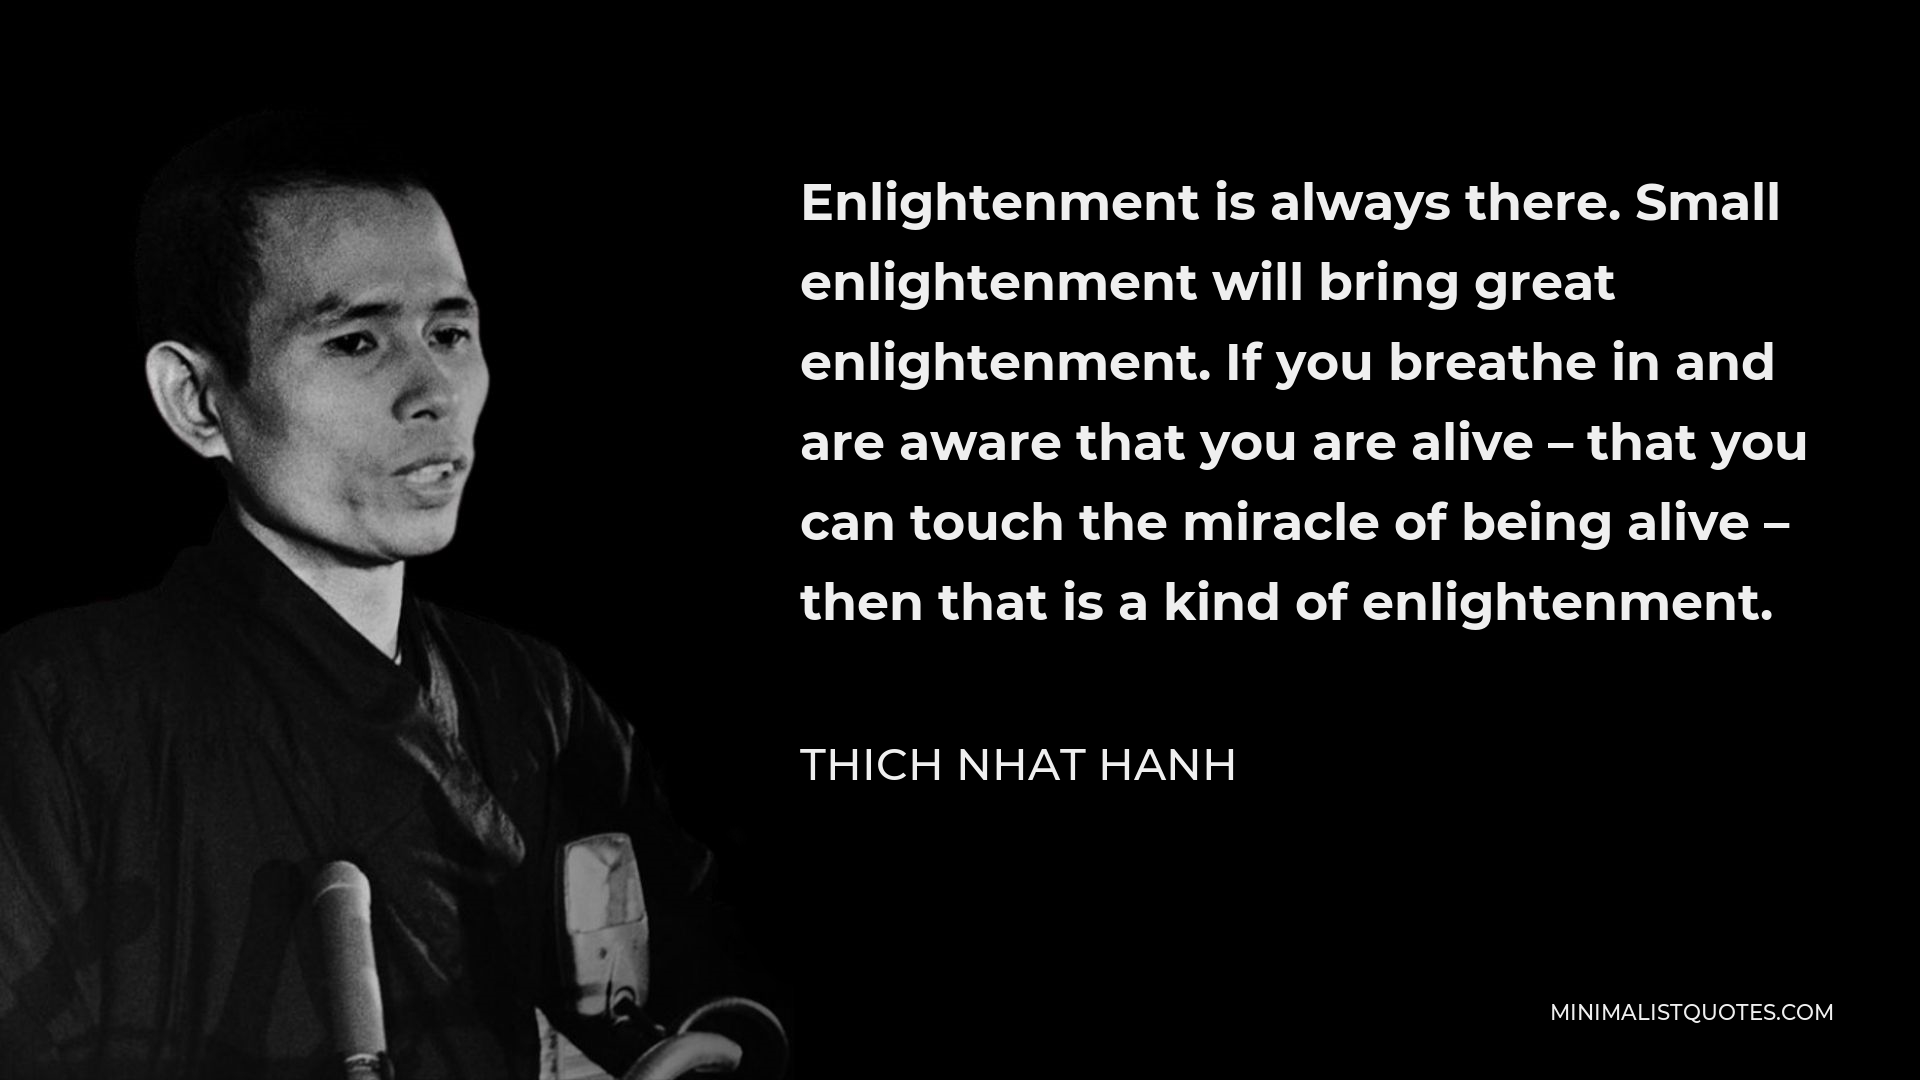 Thich Nhat Hanh Quote - Enlightenment is always there. Small enlightenment will bring great enlightenment. If you breathe in and are aware that you are alive – that you can touch the miracle of being alive – then that is a kind of enlightenment.